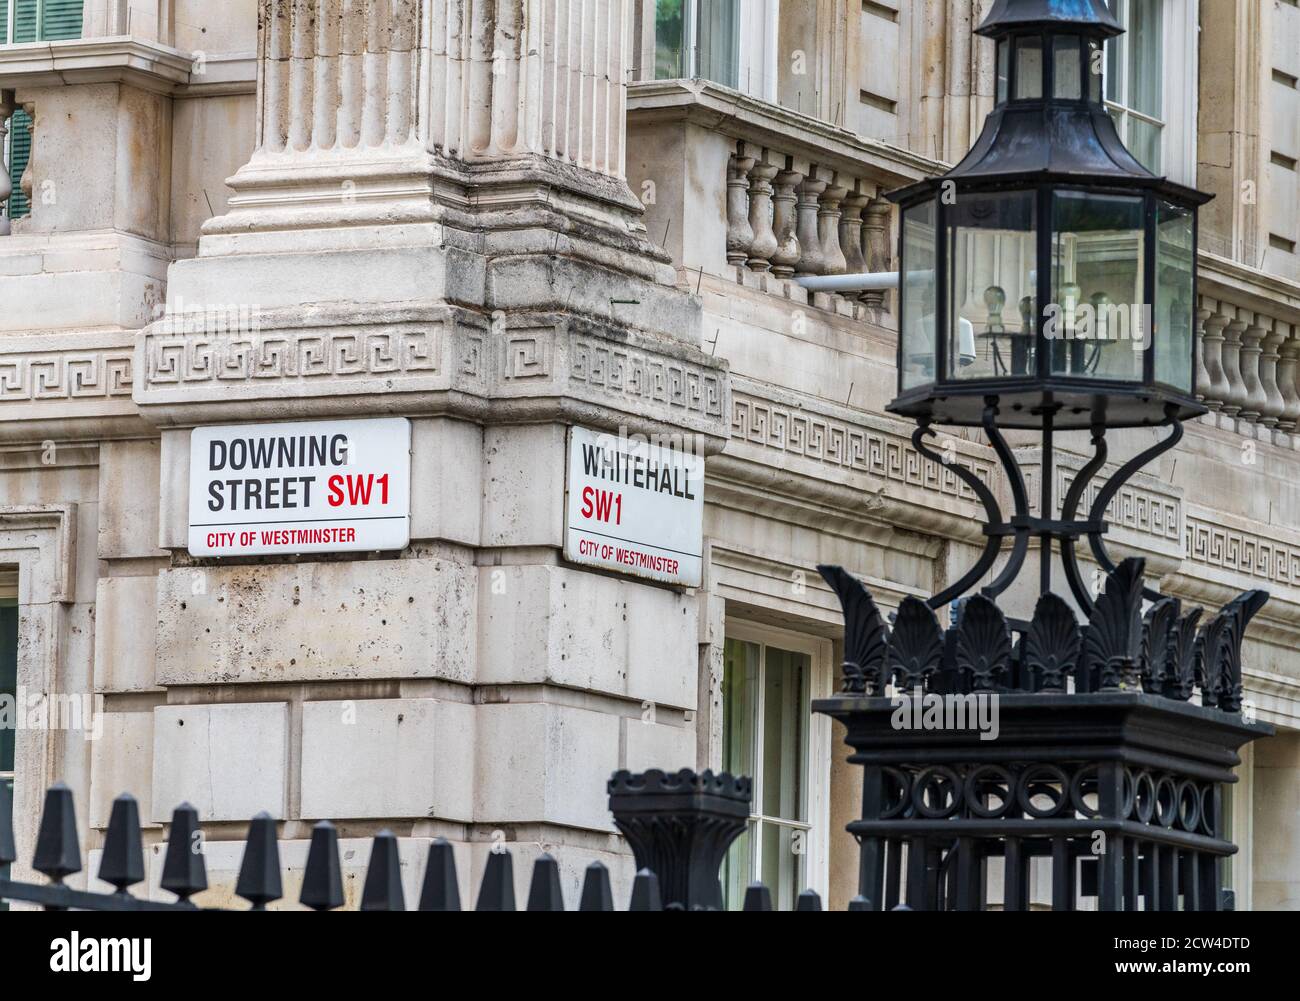 Downing Street & Whitehall SW1 Street Signs London - Whitehall is at the heart of the City of Westminster Government District in Central London Stock Photo